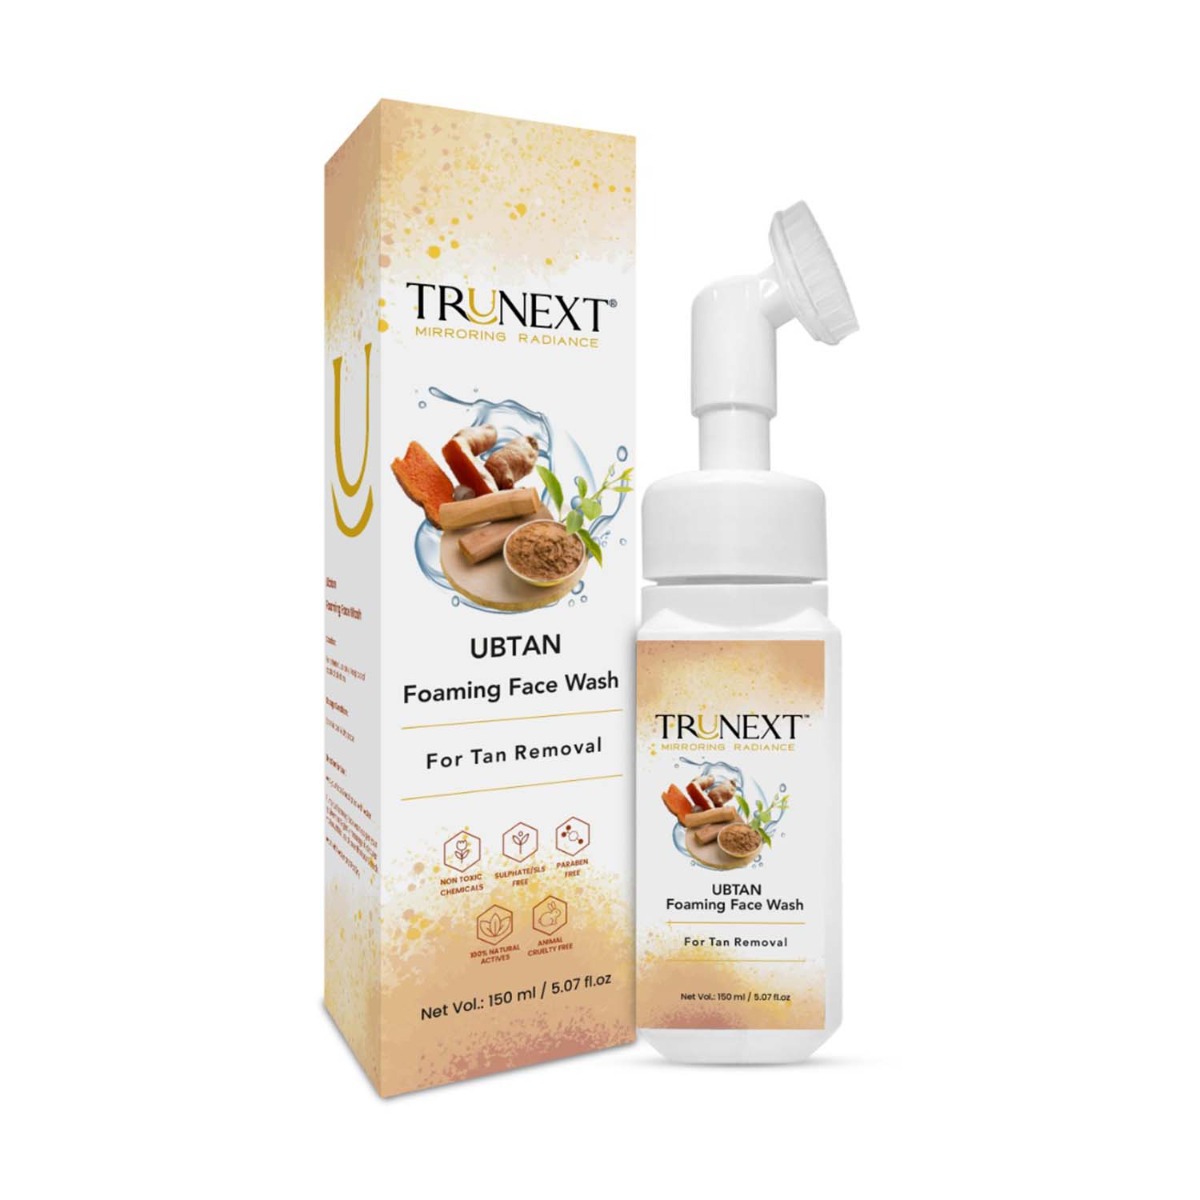 Trunext Ubtan Foaming Face Wash With A Build In Face Brush, 150ml